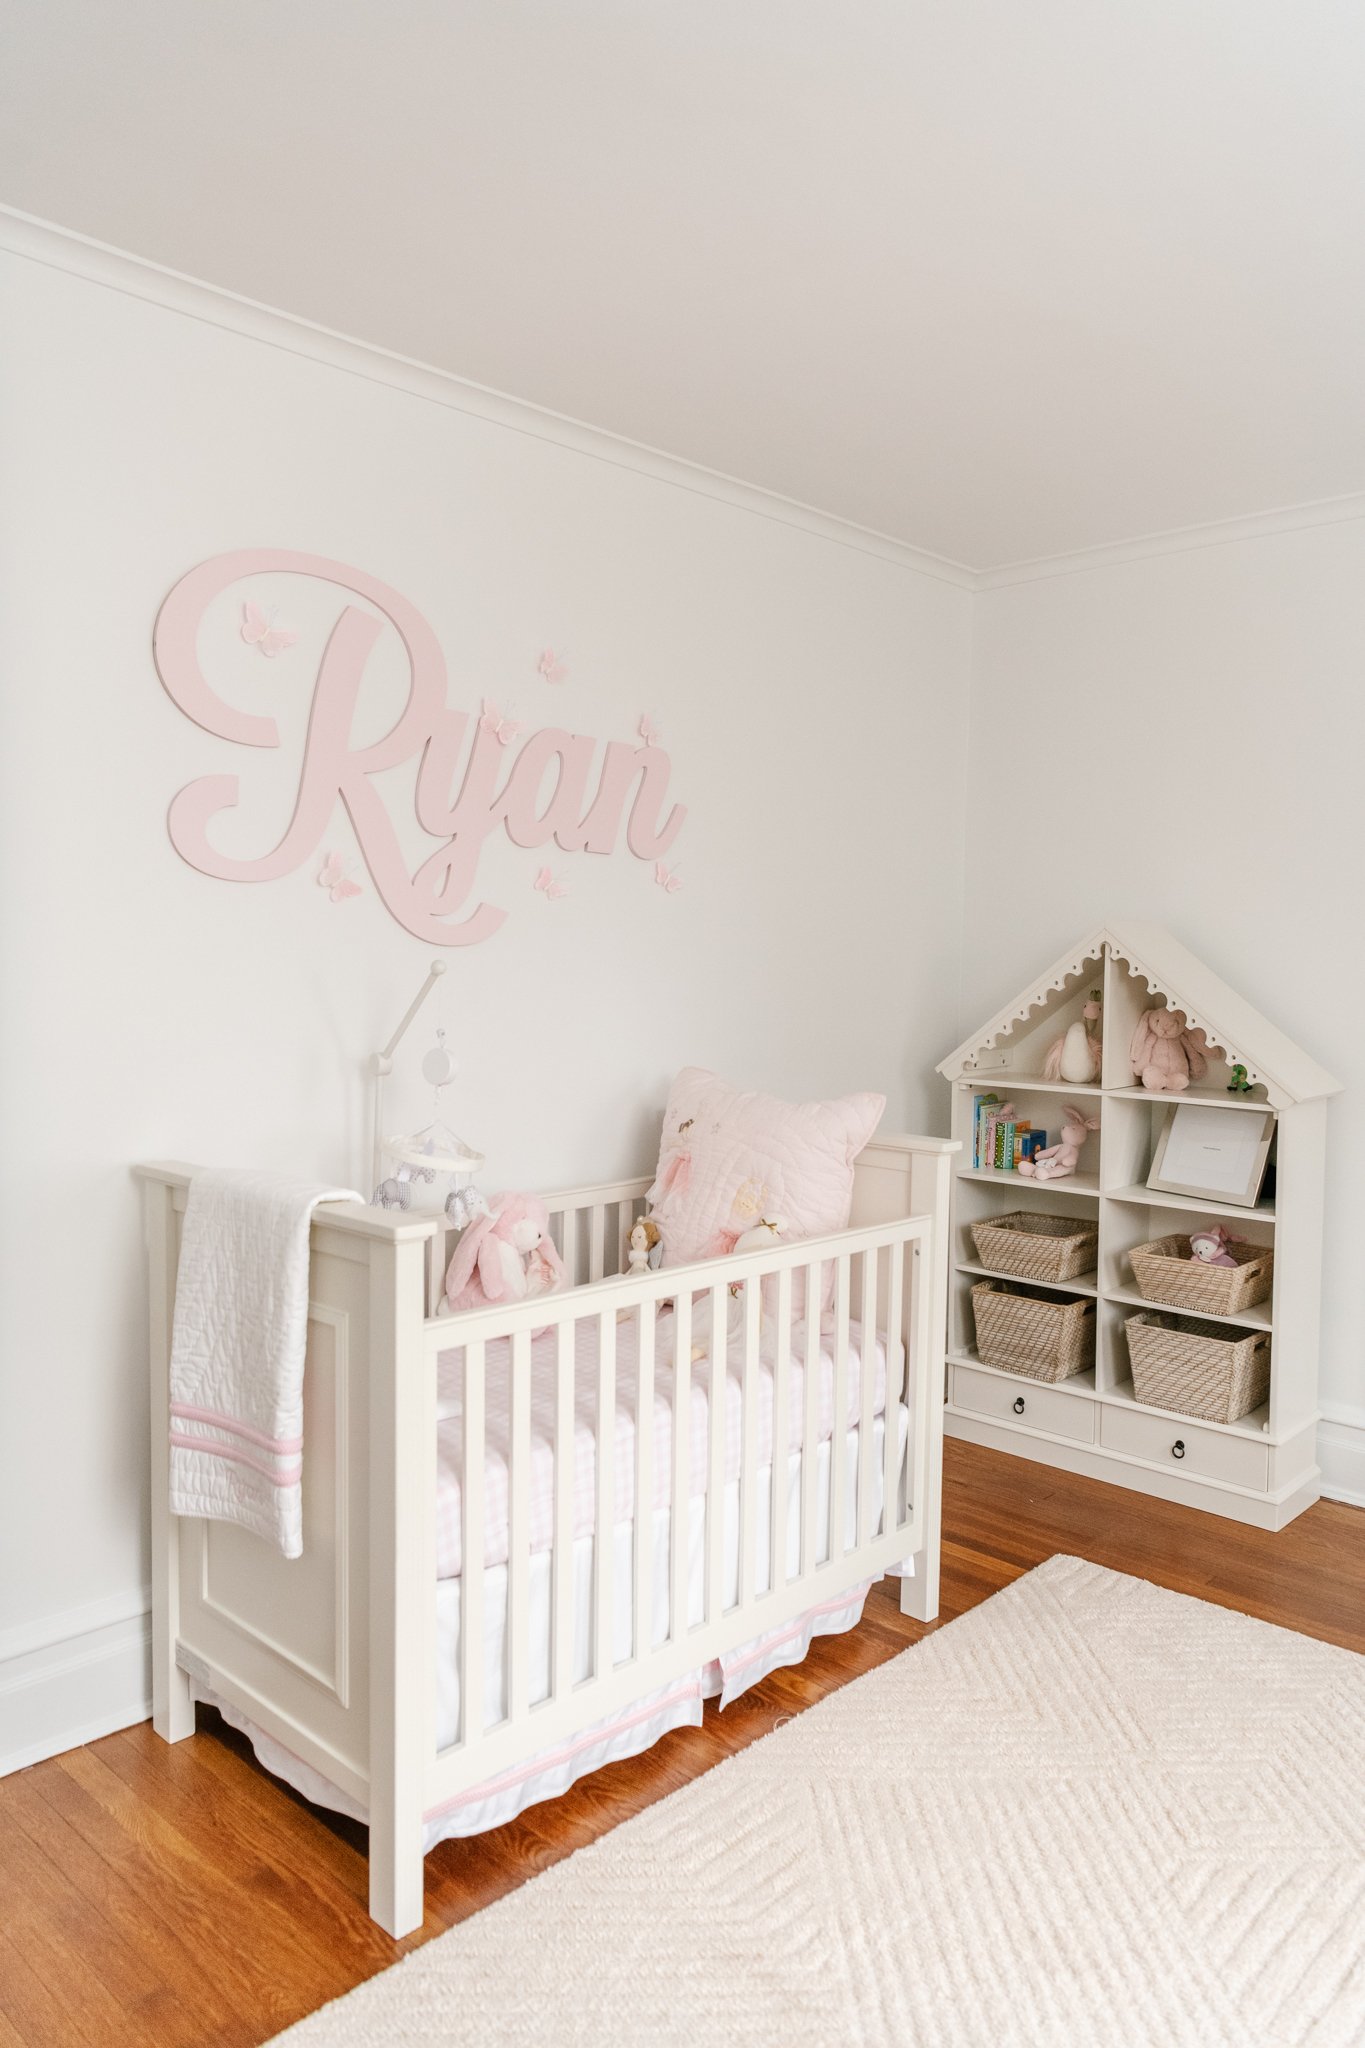  Nicole Hawkins Photography captures a little girls nursery with a pink wooden name sign on the wall above the crib. name sign in nursery pink and white girl nursery #NicoleHawkinsPhotography #NicoleHawkinsNewborns #Babygirl #Newbornfamilyportraits #